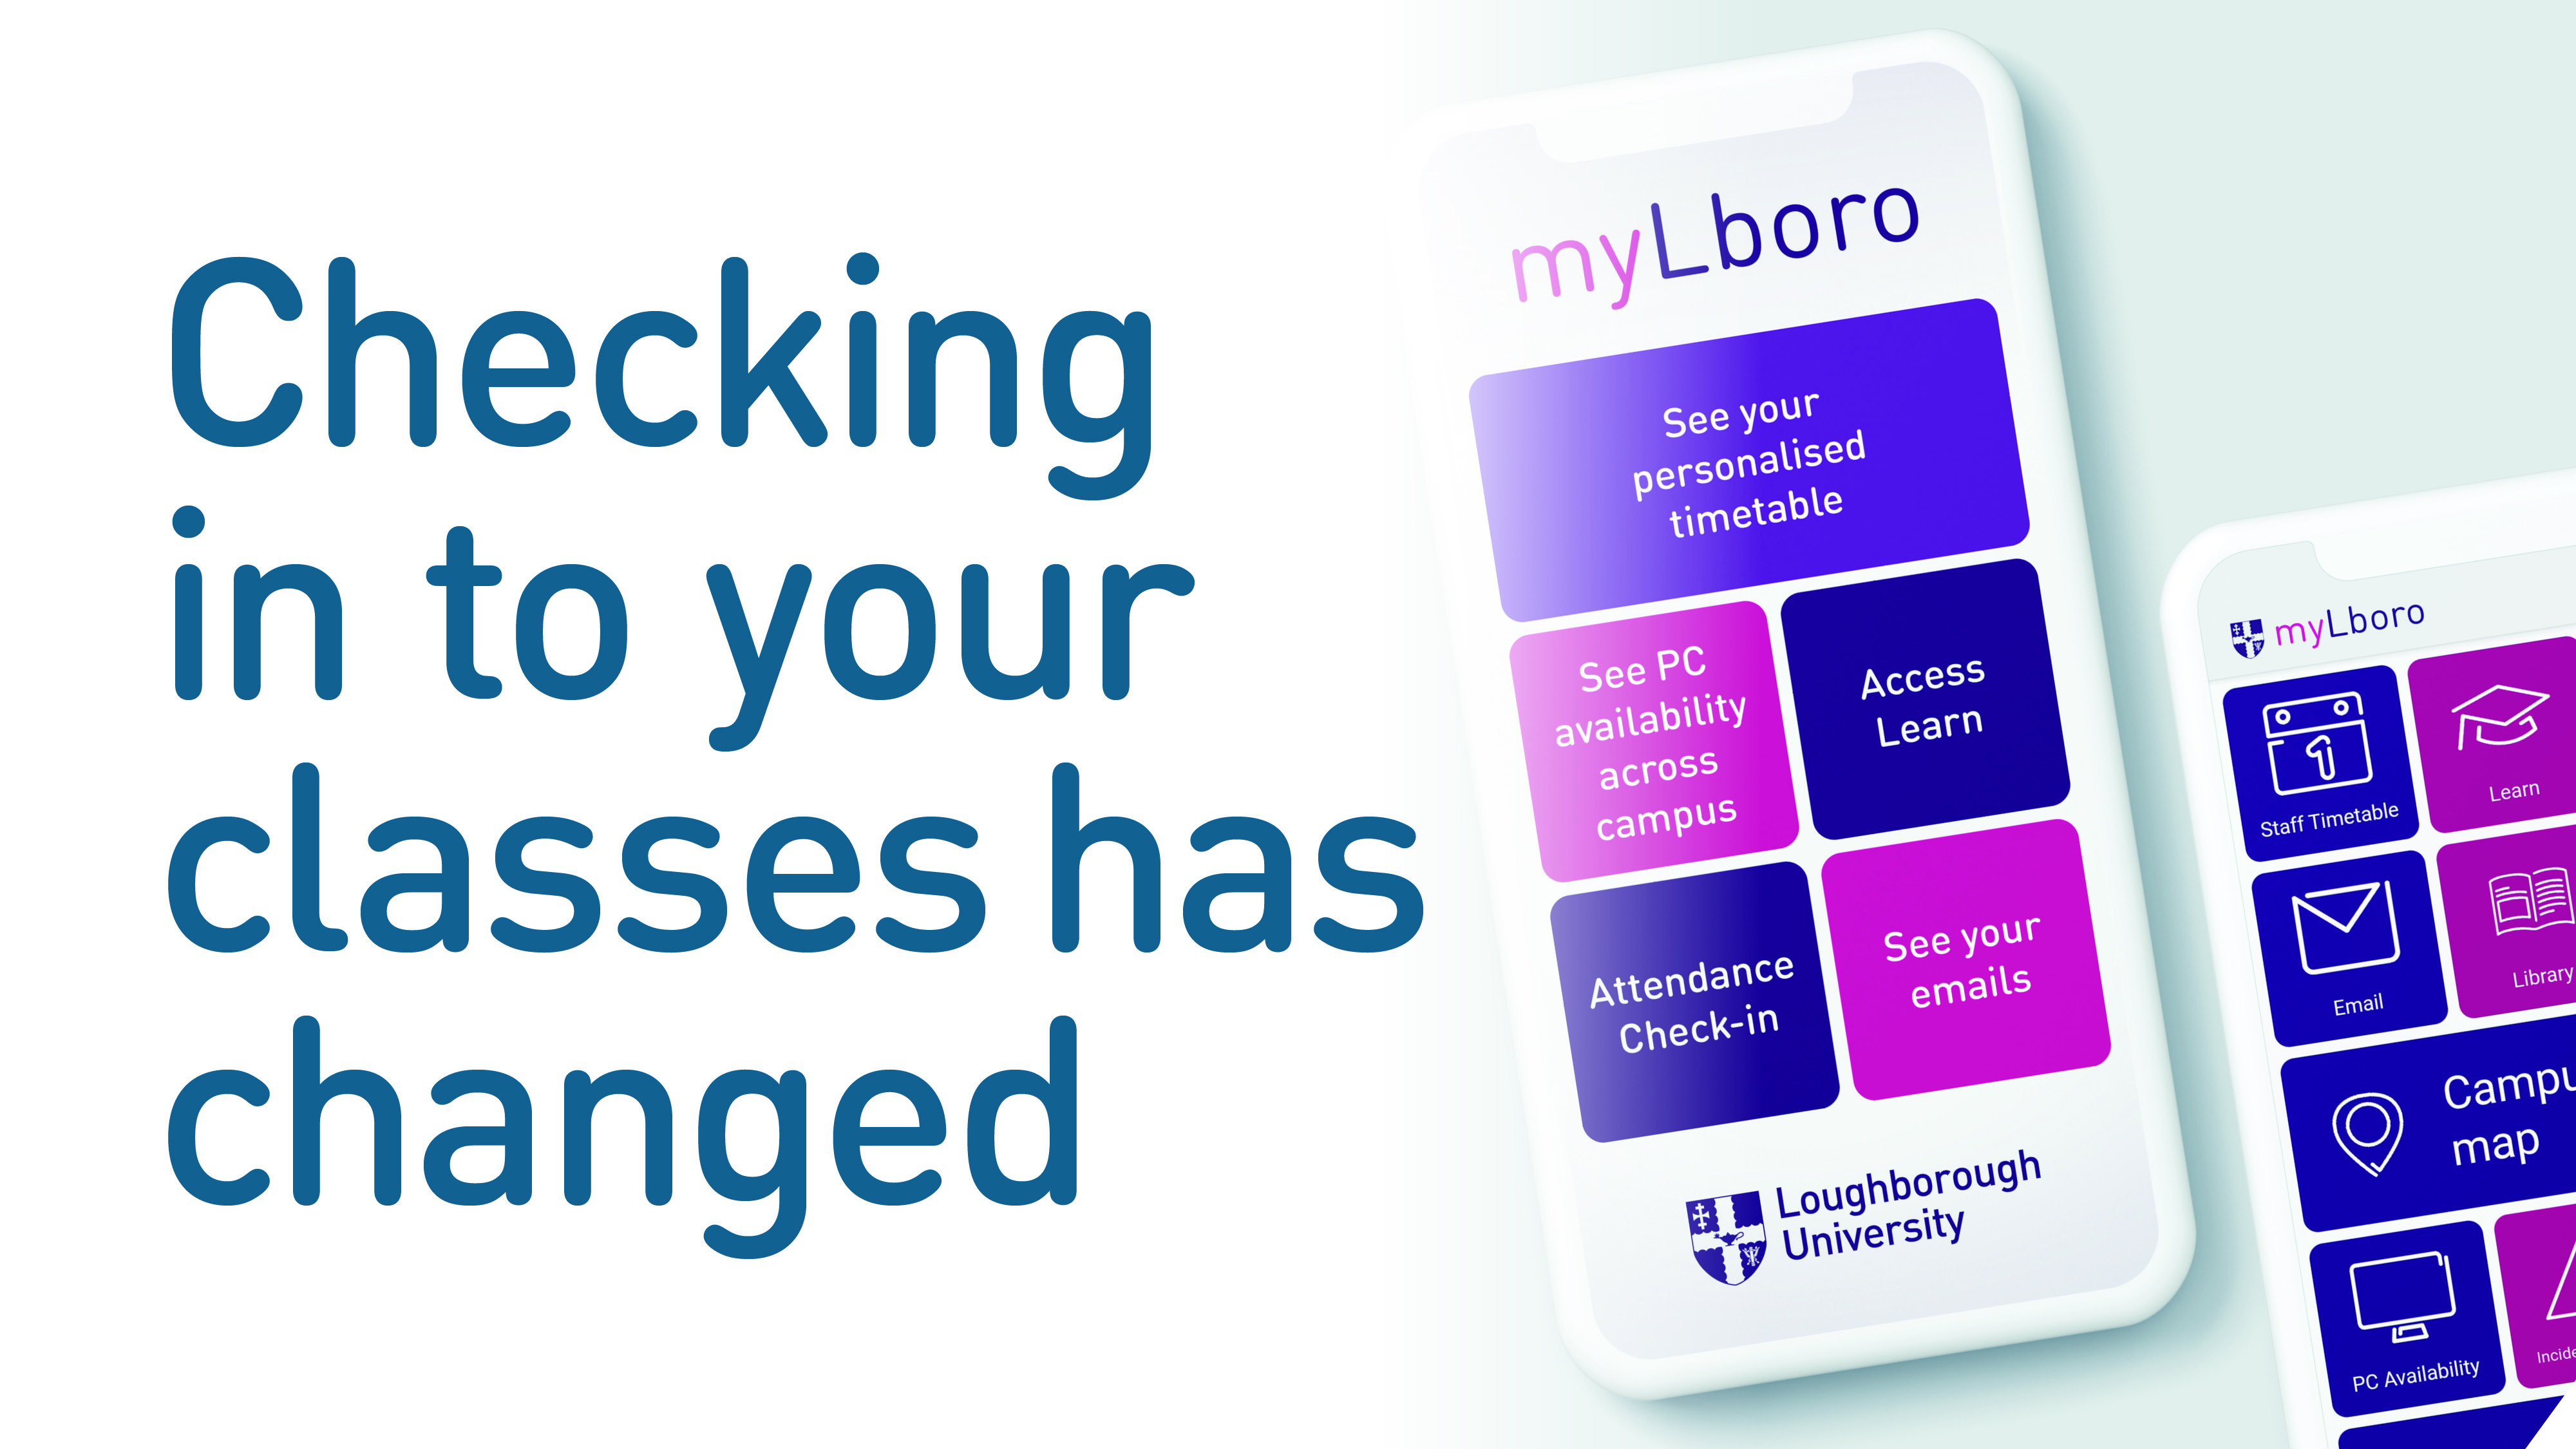 Image of the myLboro app on a smartphone along with text saying 'Checking in to your classes has changed' 